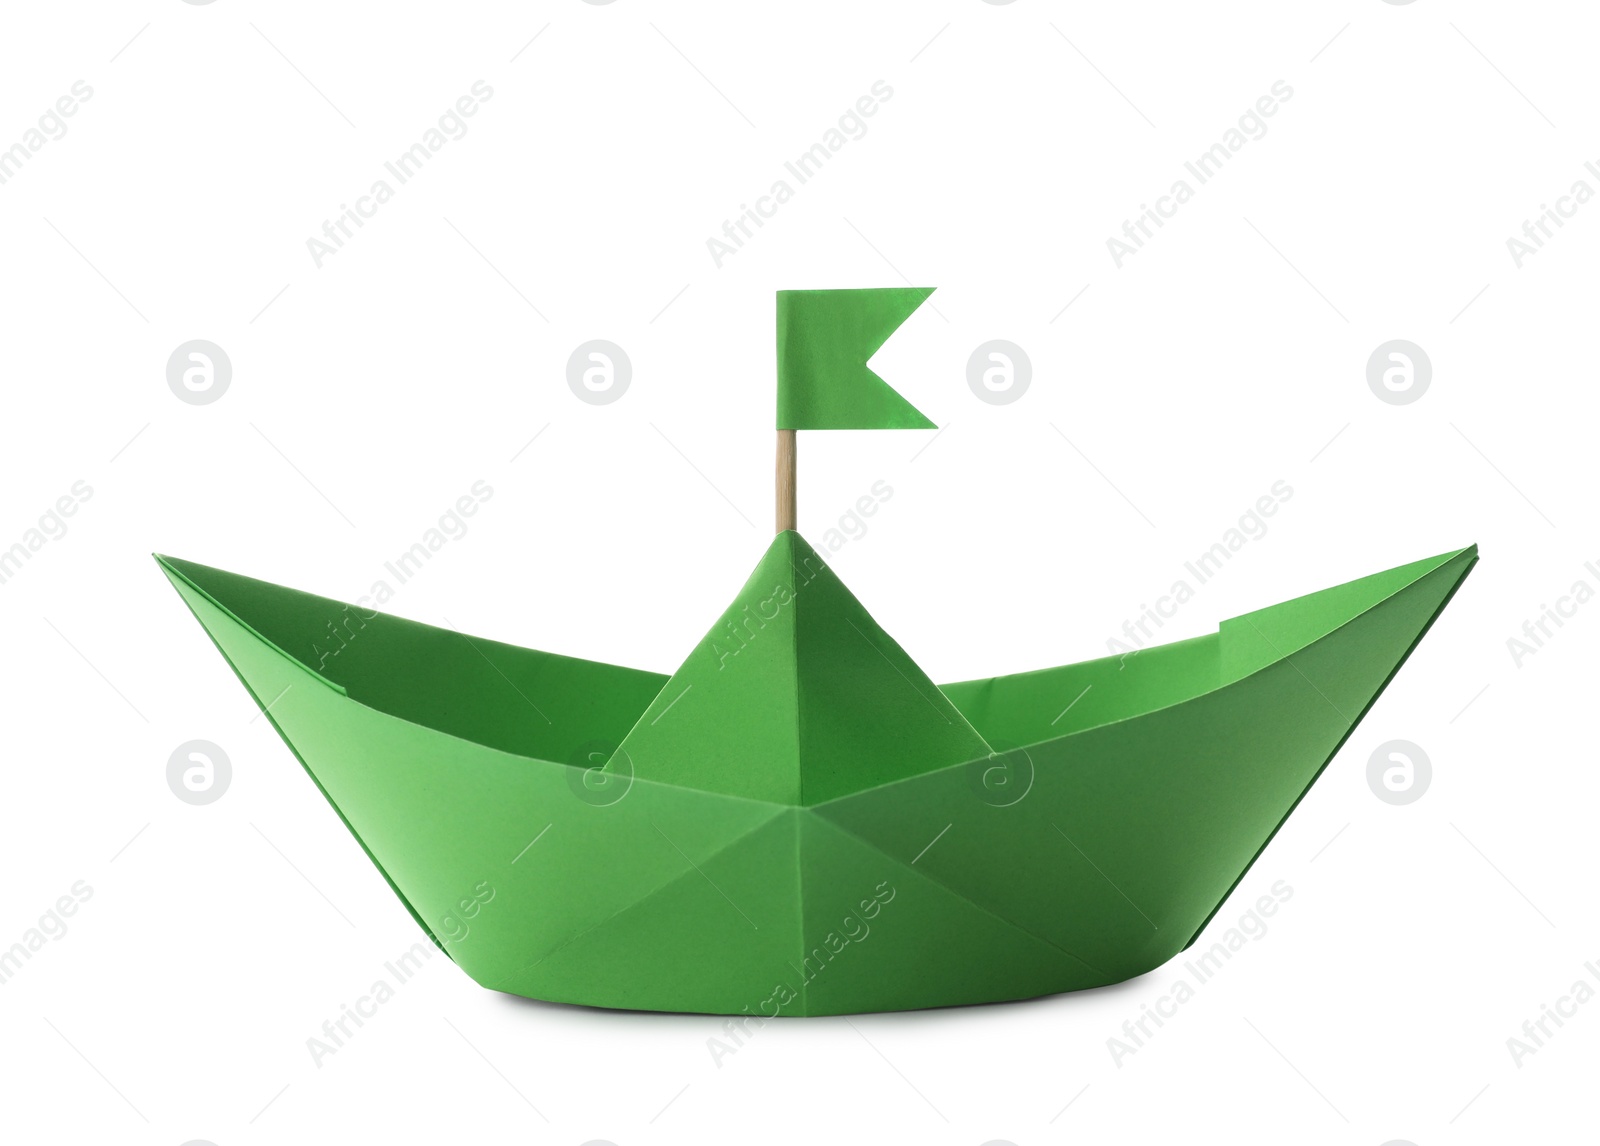 Photo of Handmade green paper boat with flag isolated on white. Origami art